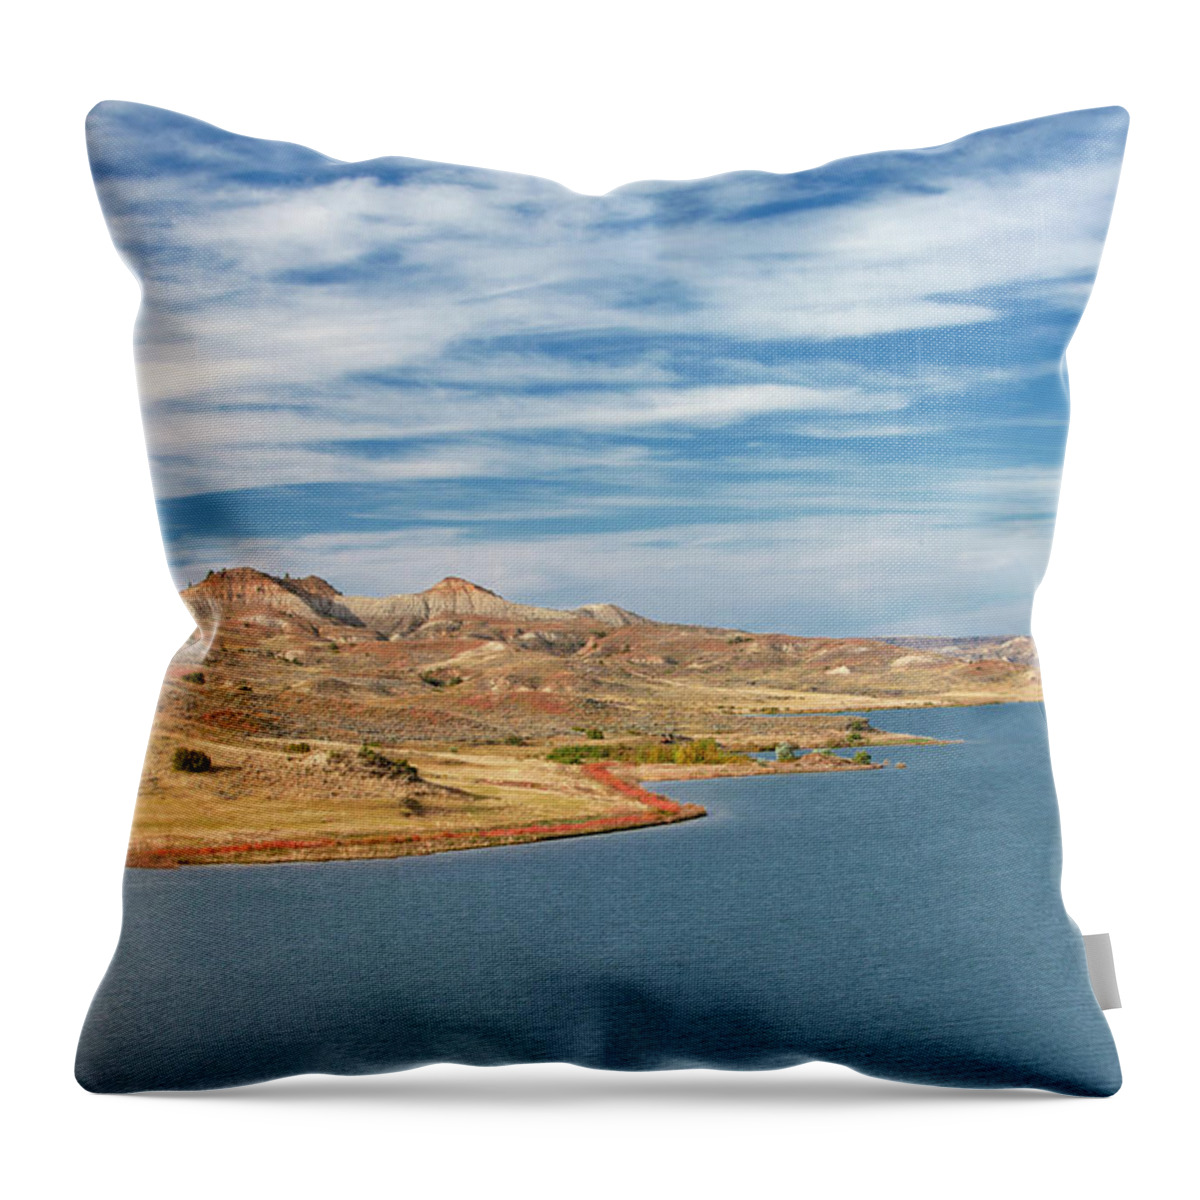 Hell Creek State Park Throw Pillow featuring the photograph Hell Creek State Park by Todd Klassy